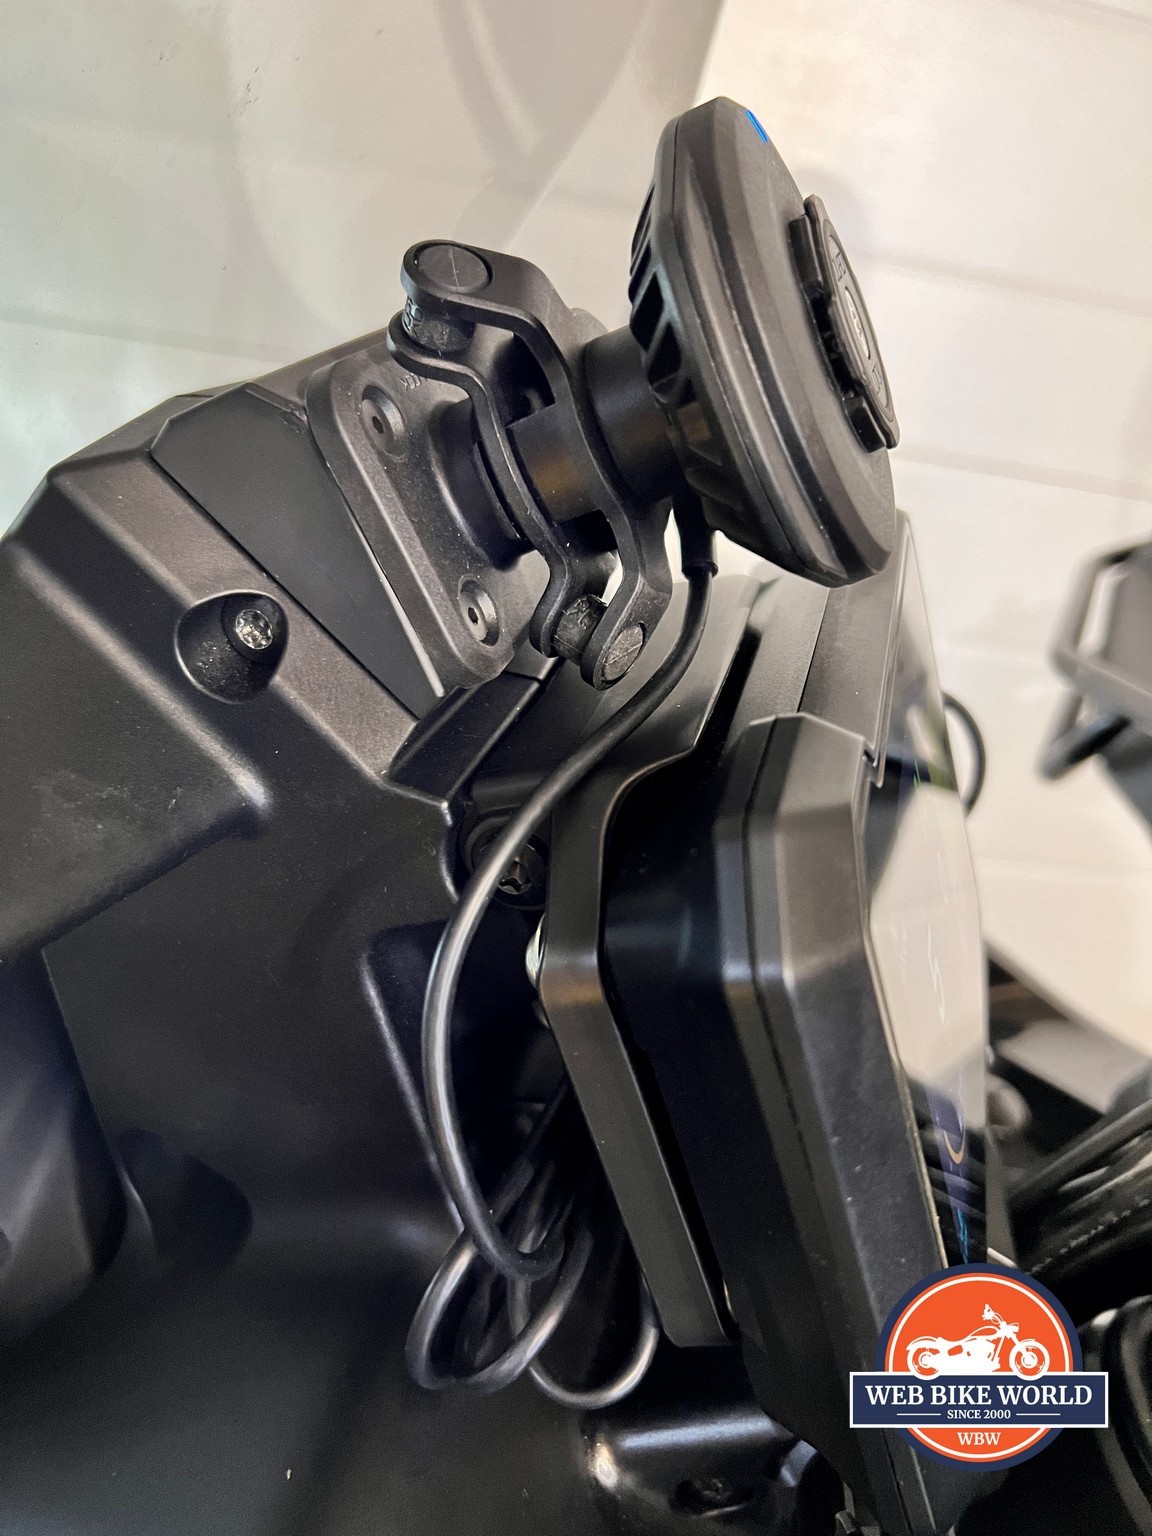 Quad Lock Motorcycle Cell Phone Mount. Is it worth the hype?